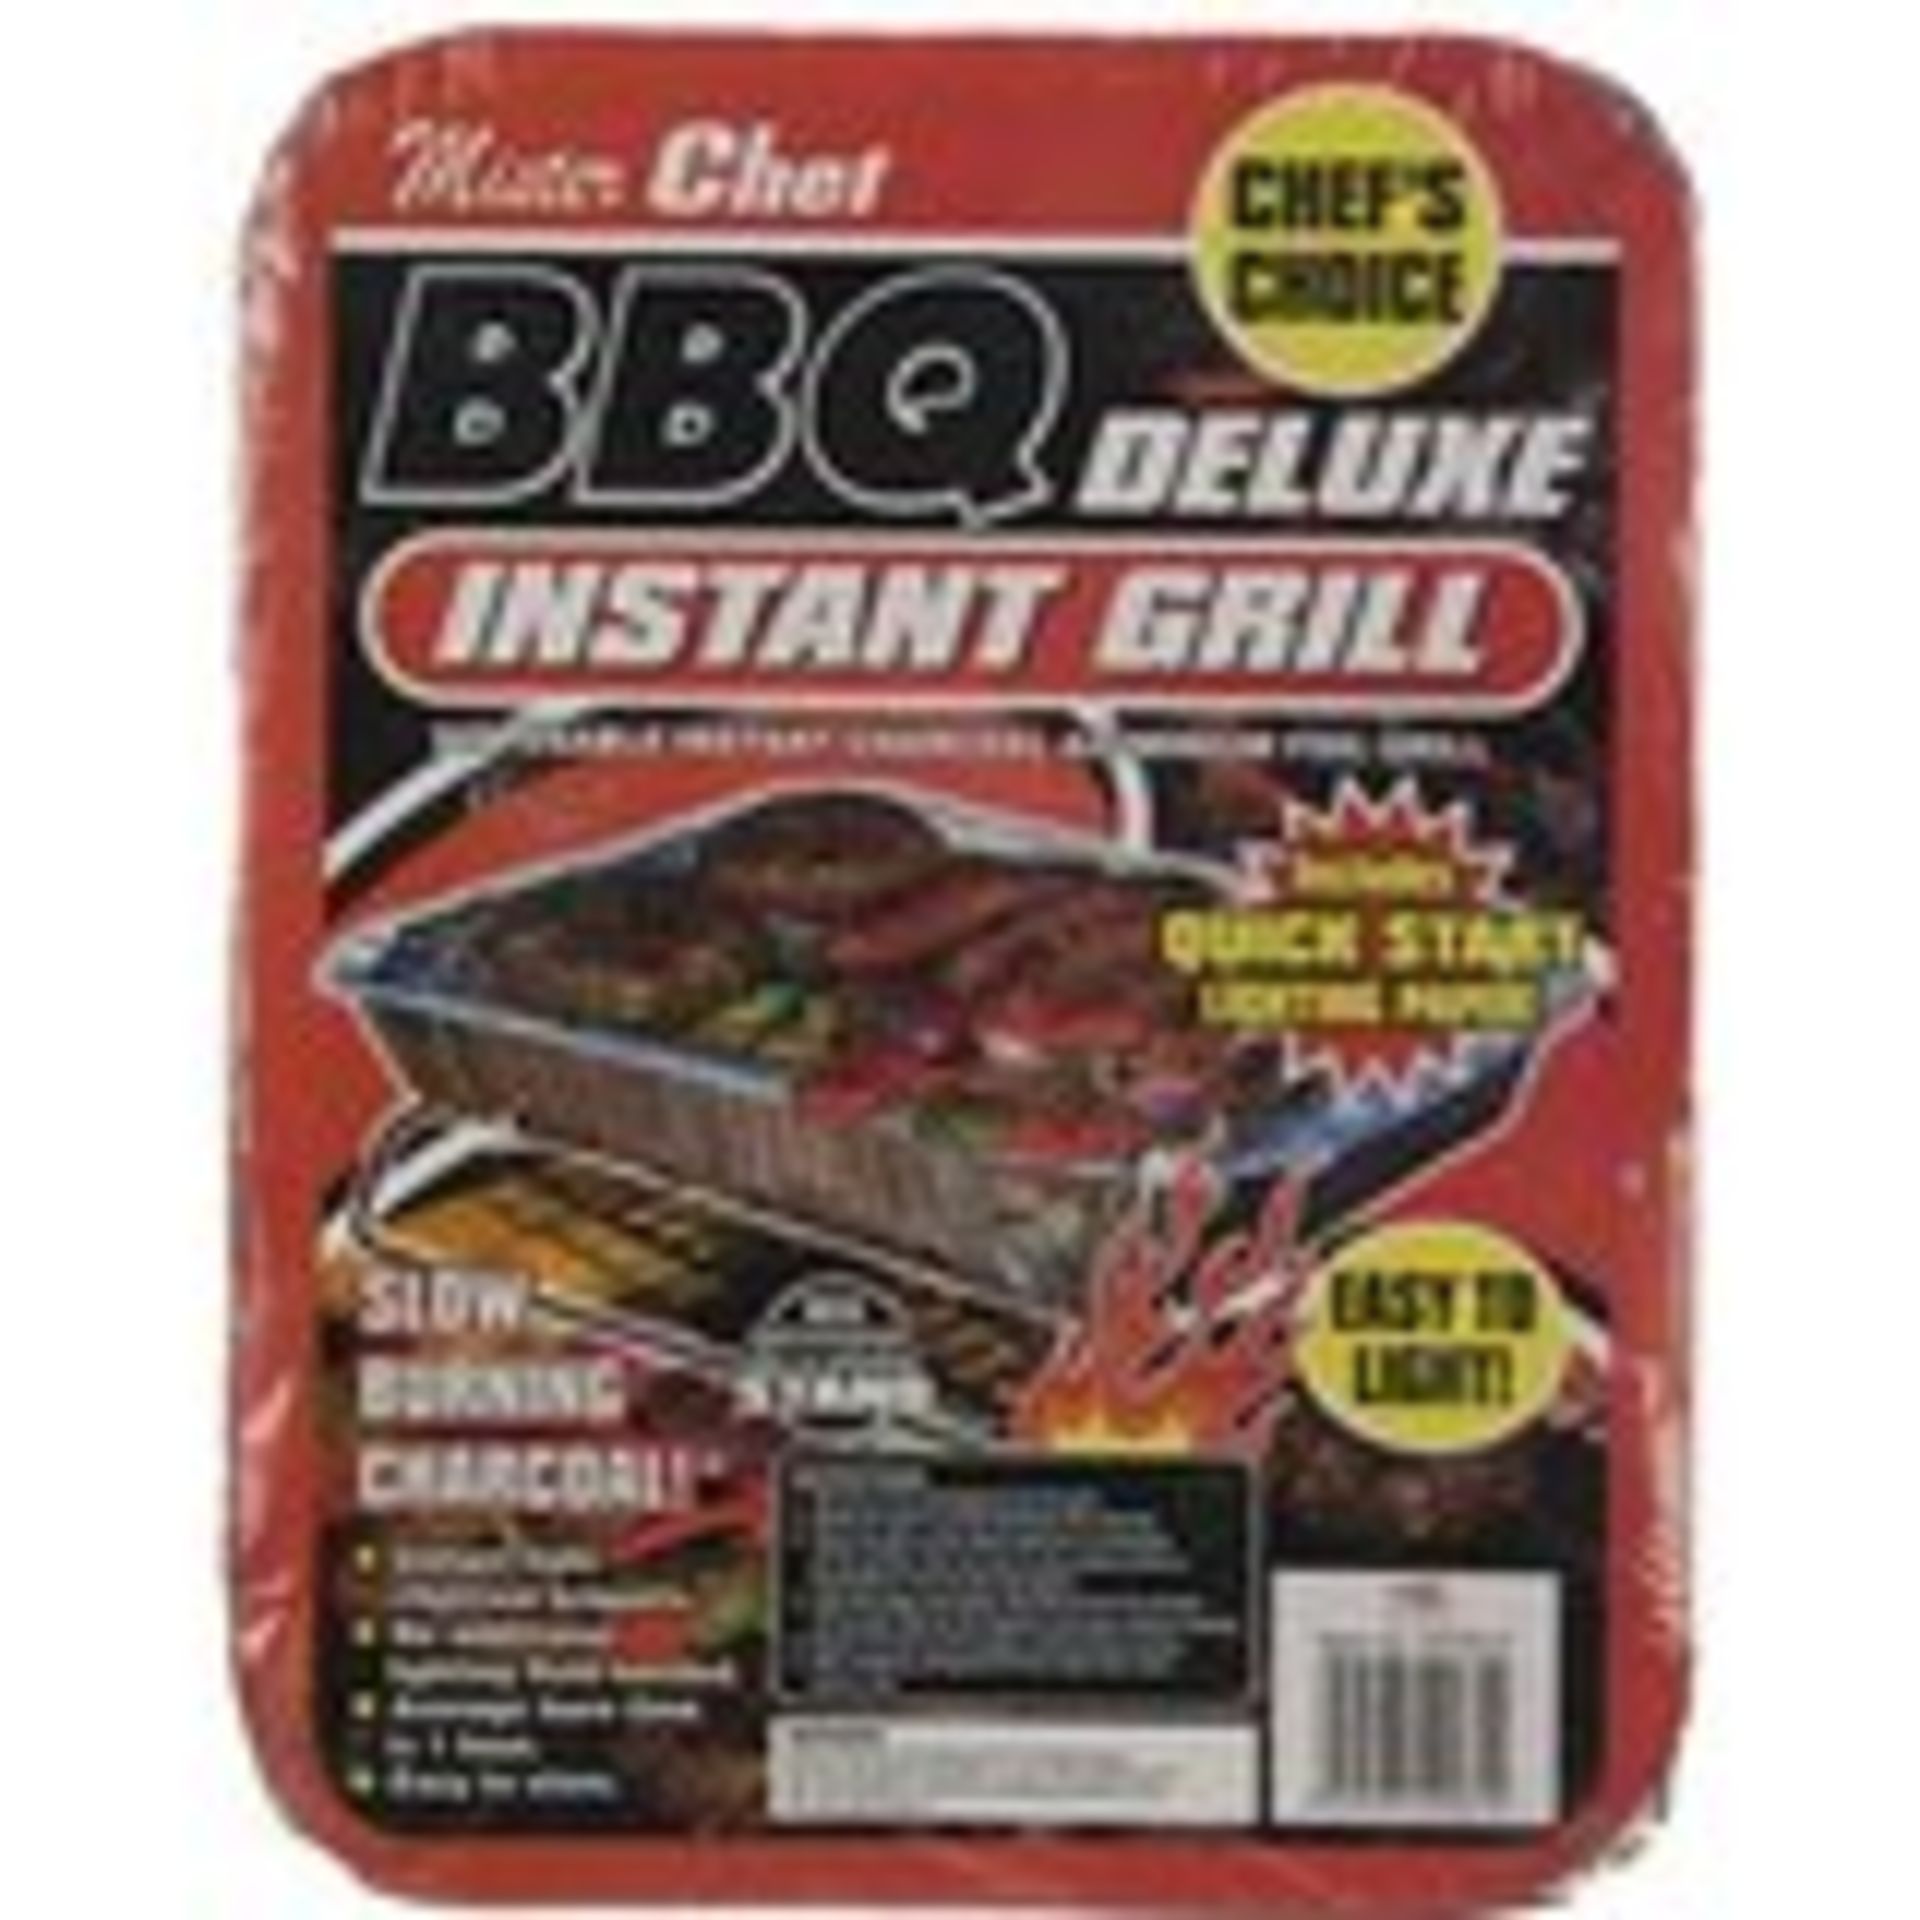 V *TRADE QTY* Brand New Jumbo Charcoal Instant BBQ In Foil Tray 48 X 31 X 6cm X 4 YOUR BID PRICE